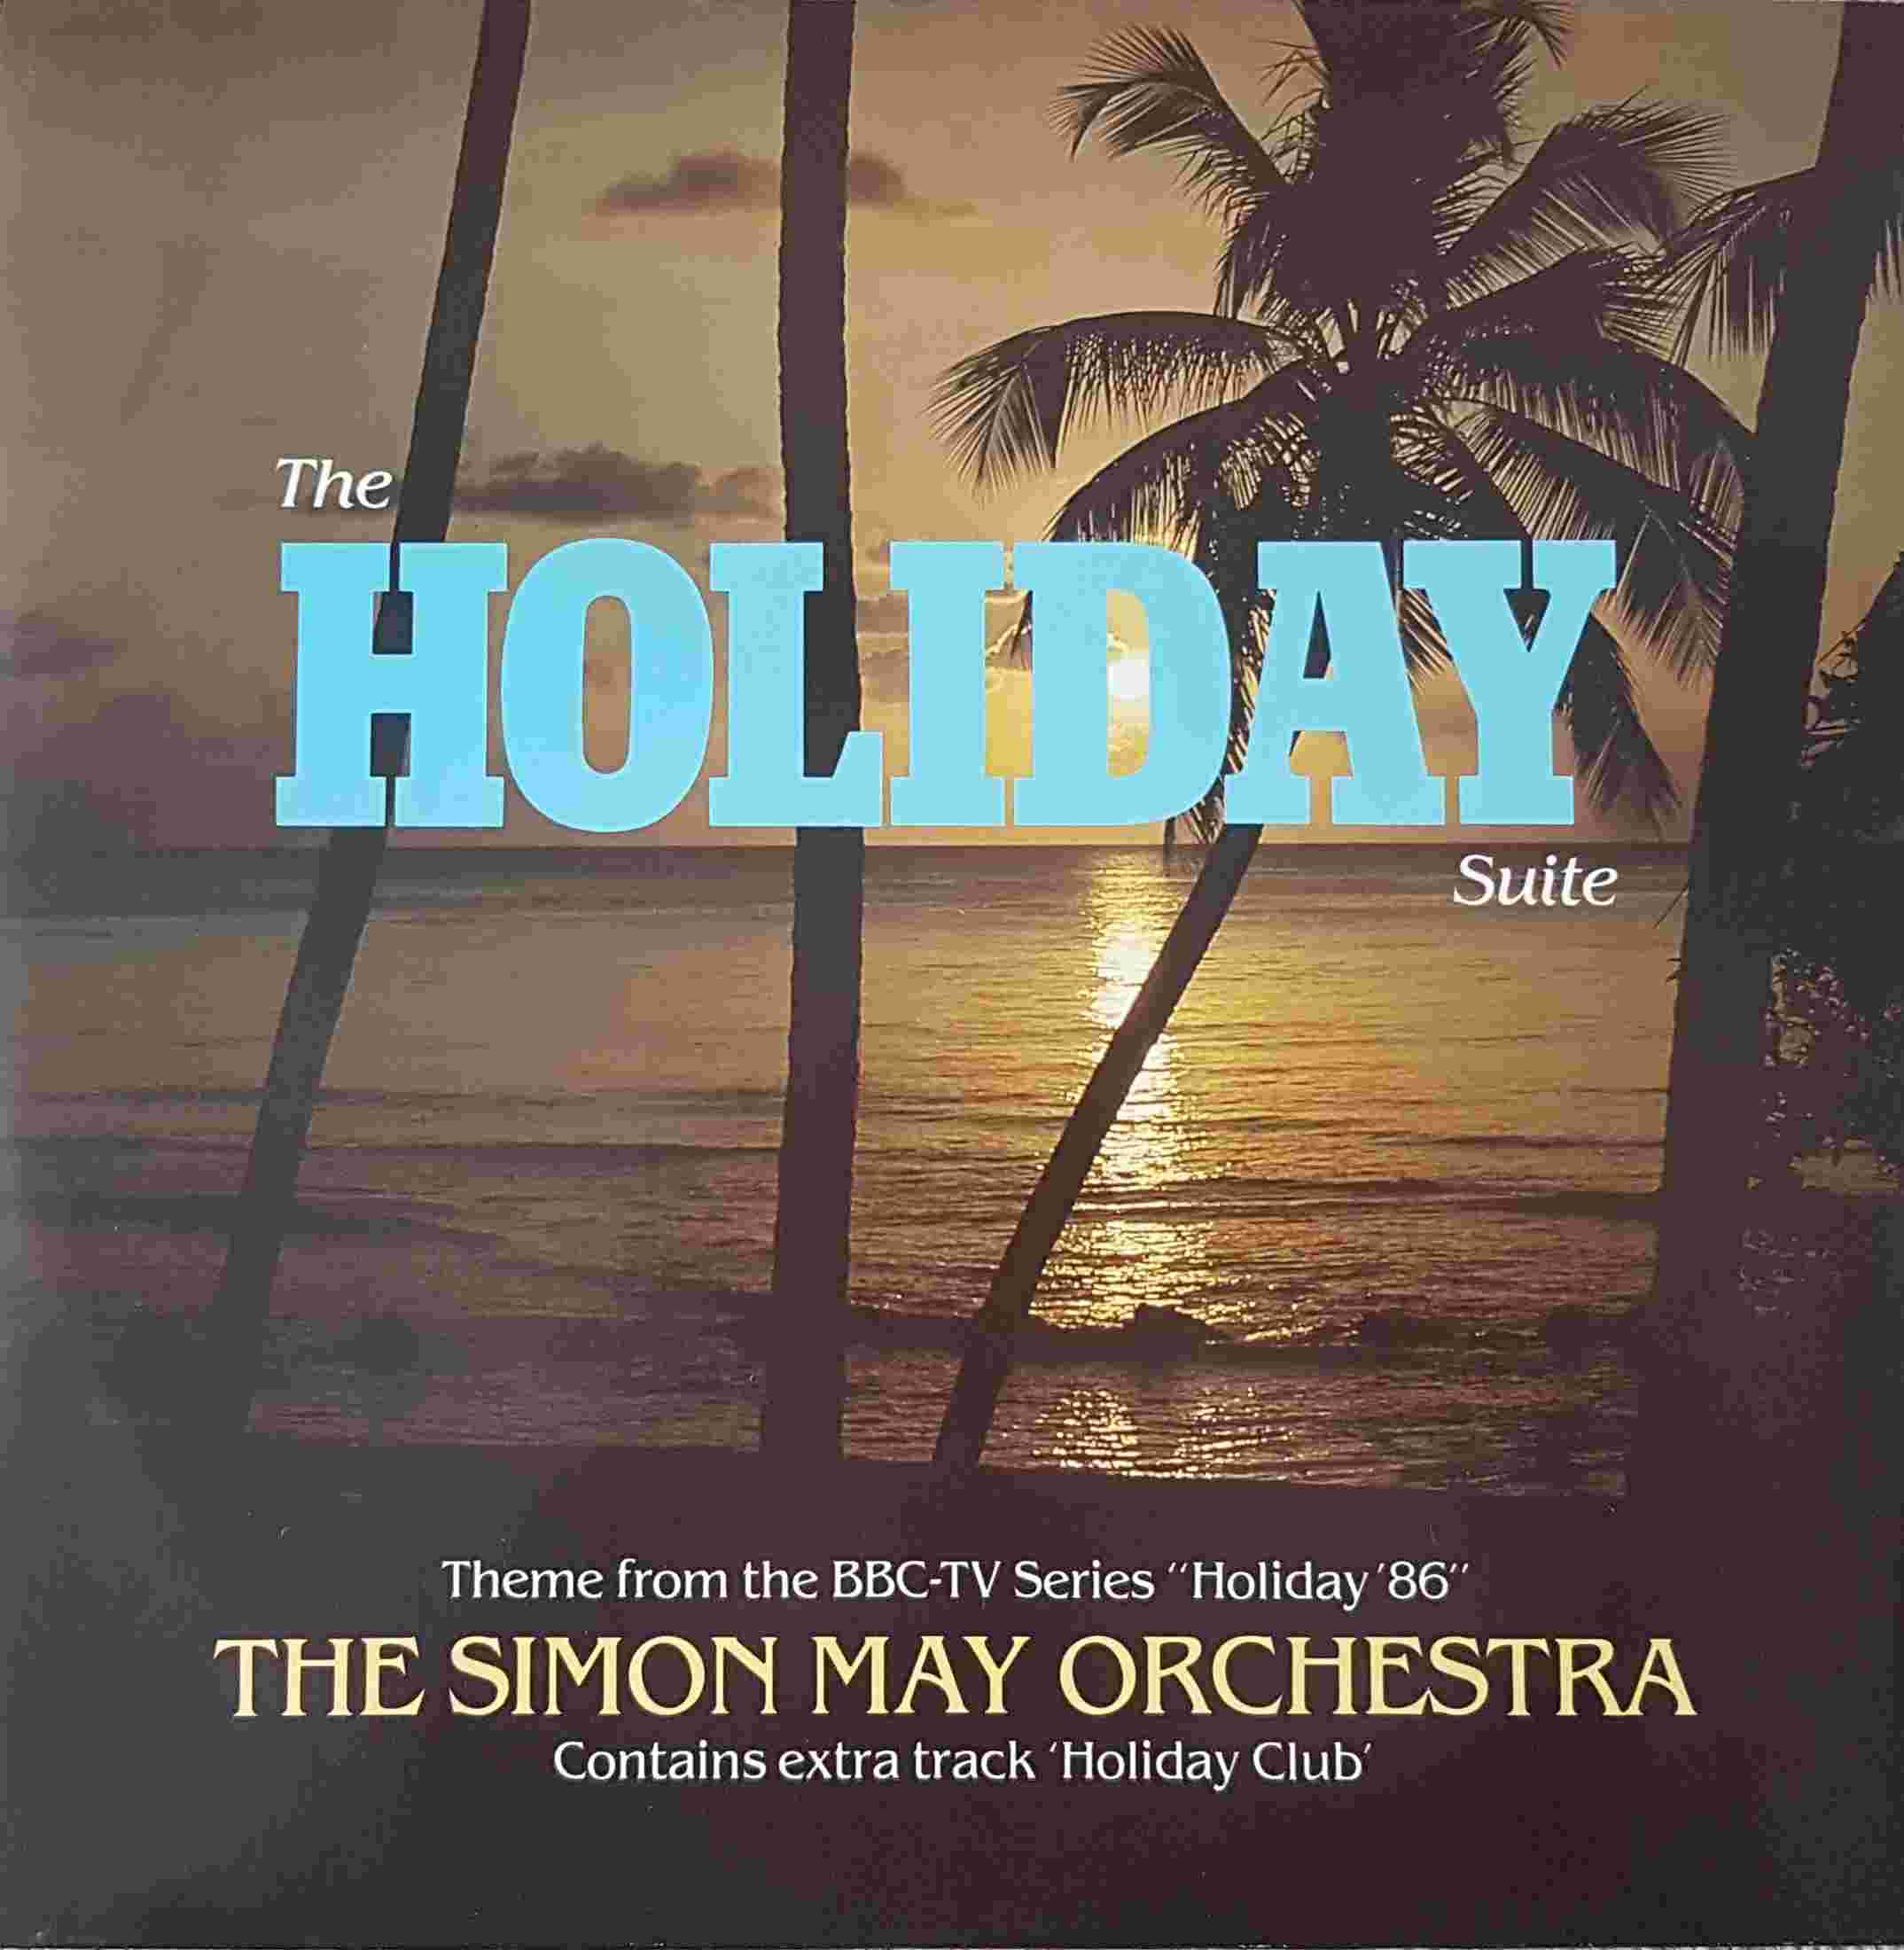 Picture of 12 RSL 181 The holiday suite (Holiday '86) by artist The Simon May orchestra from the BBC 12inches - Records and Tapes library